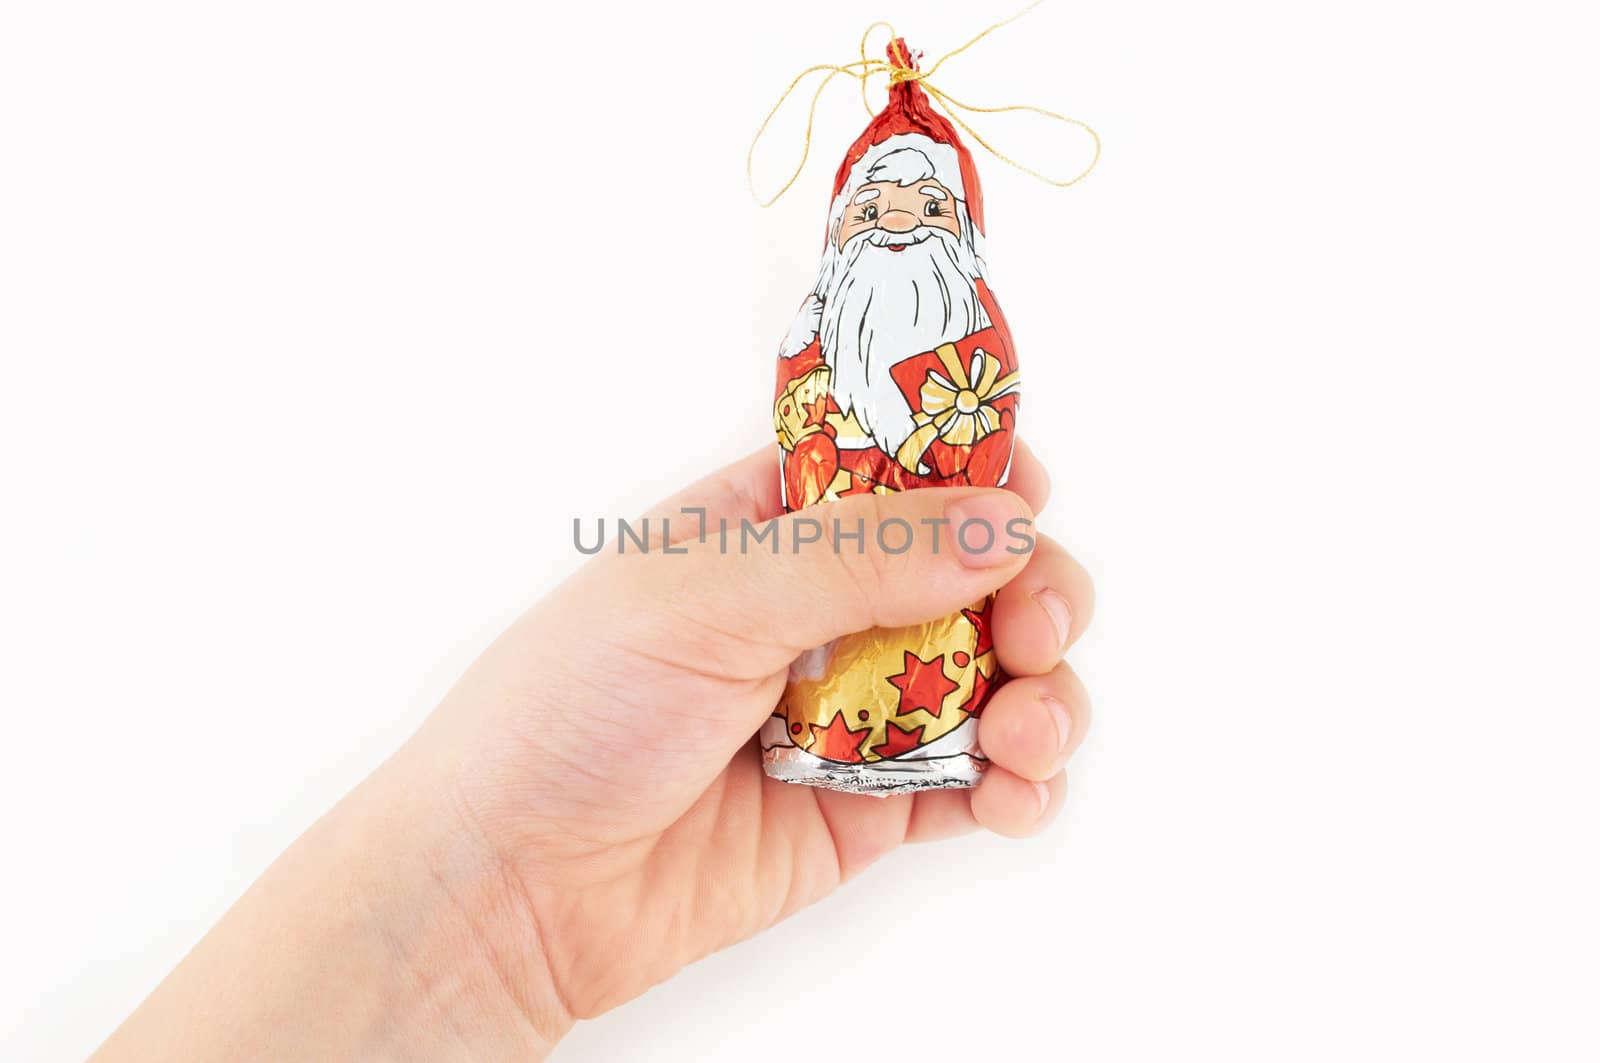 Children's hand holding a Christmas decoration in the form of a chocolate Santa Claus figures on an isolated white background